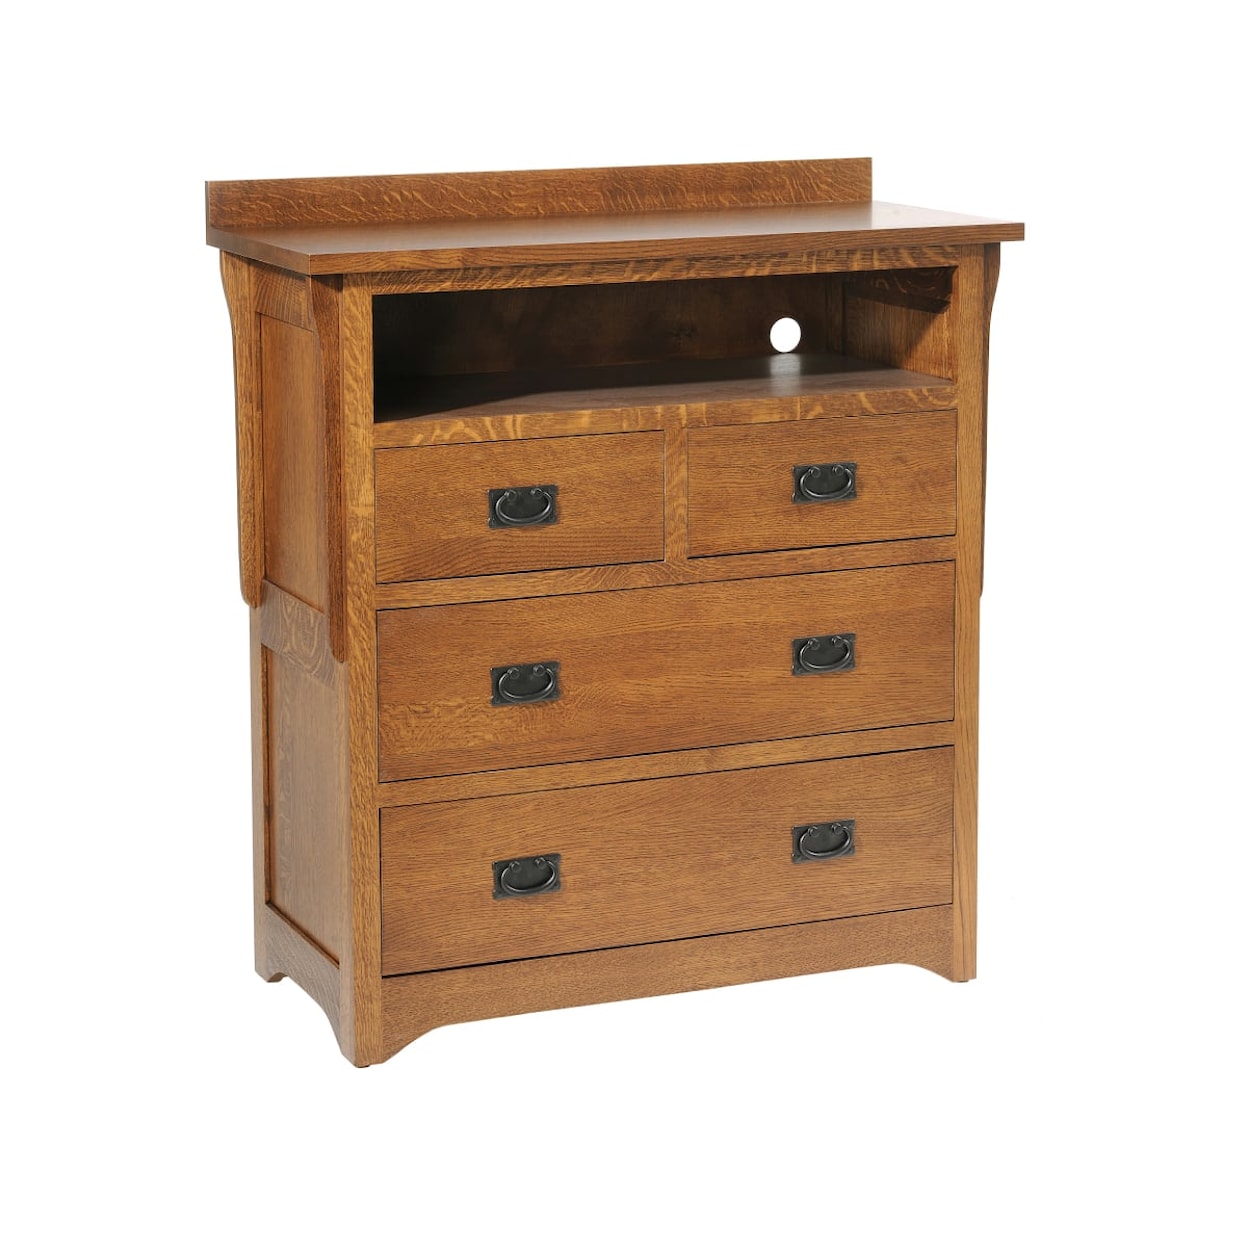 Millcraft San Juan Mission 40" Chest of Drawers